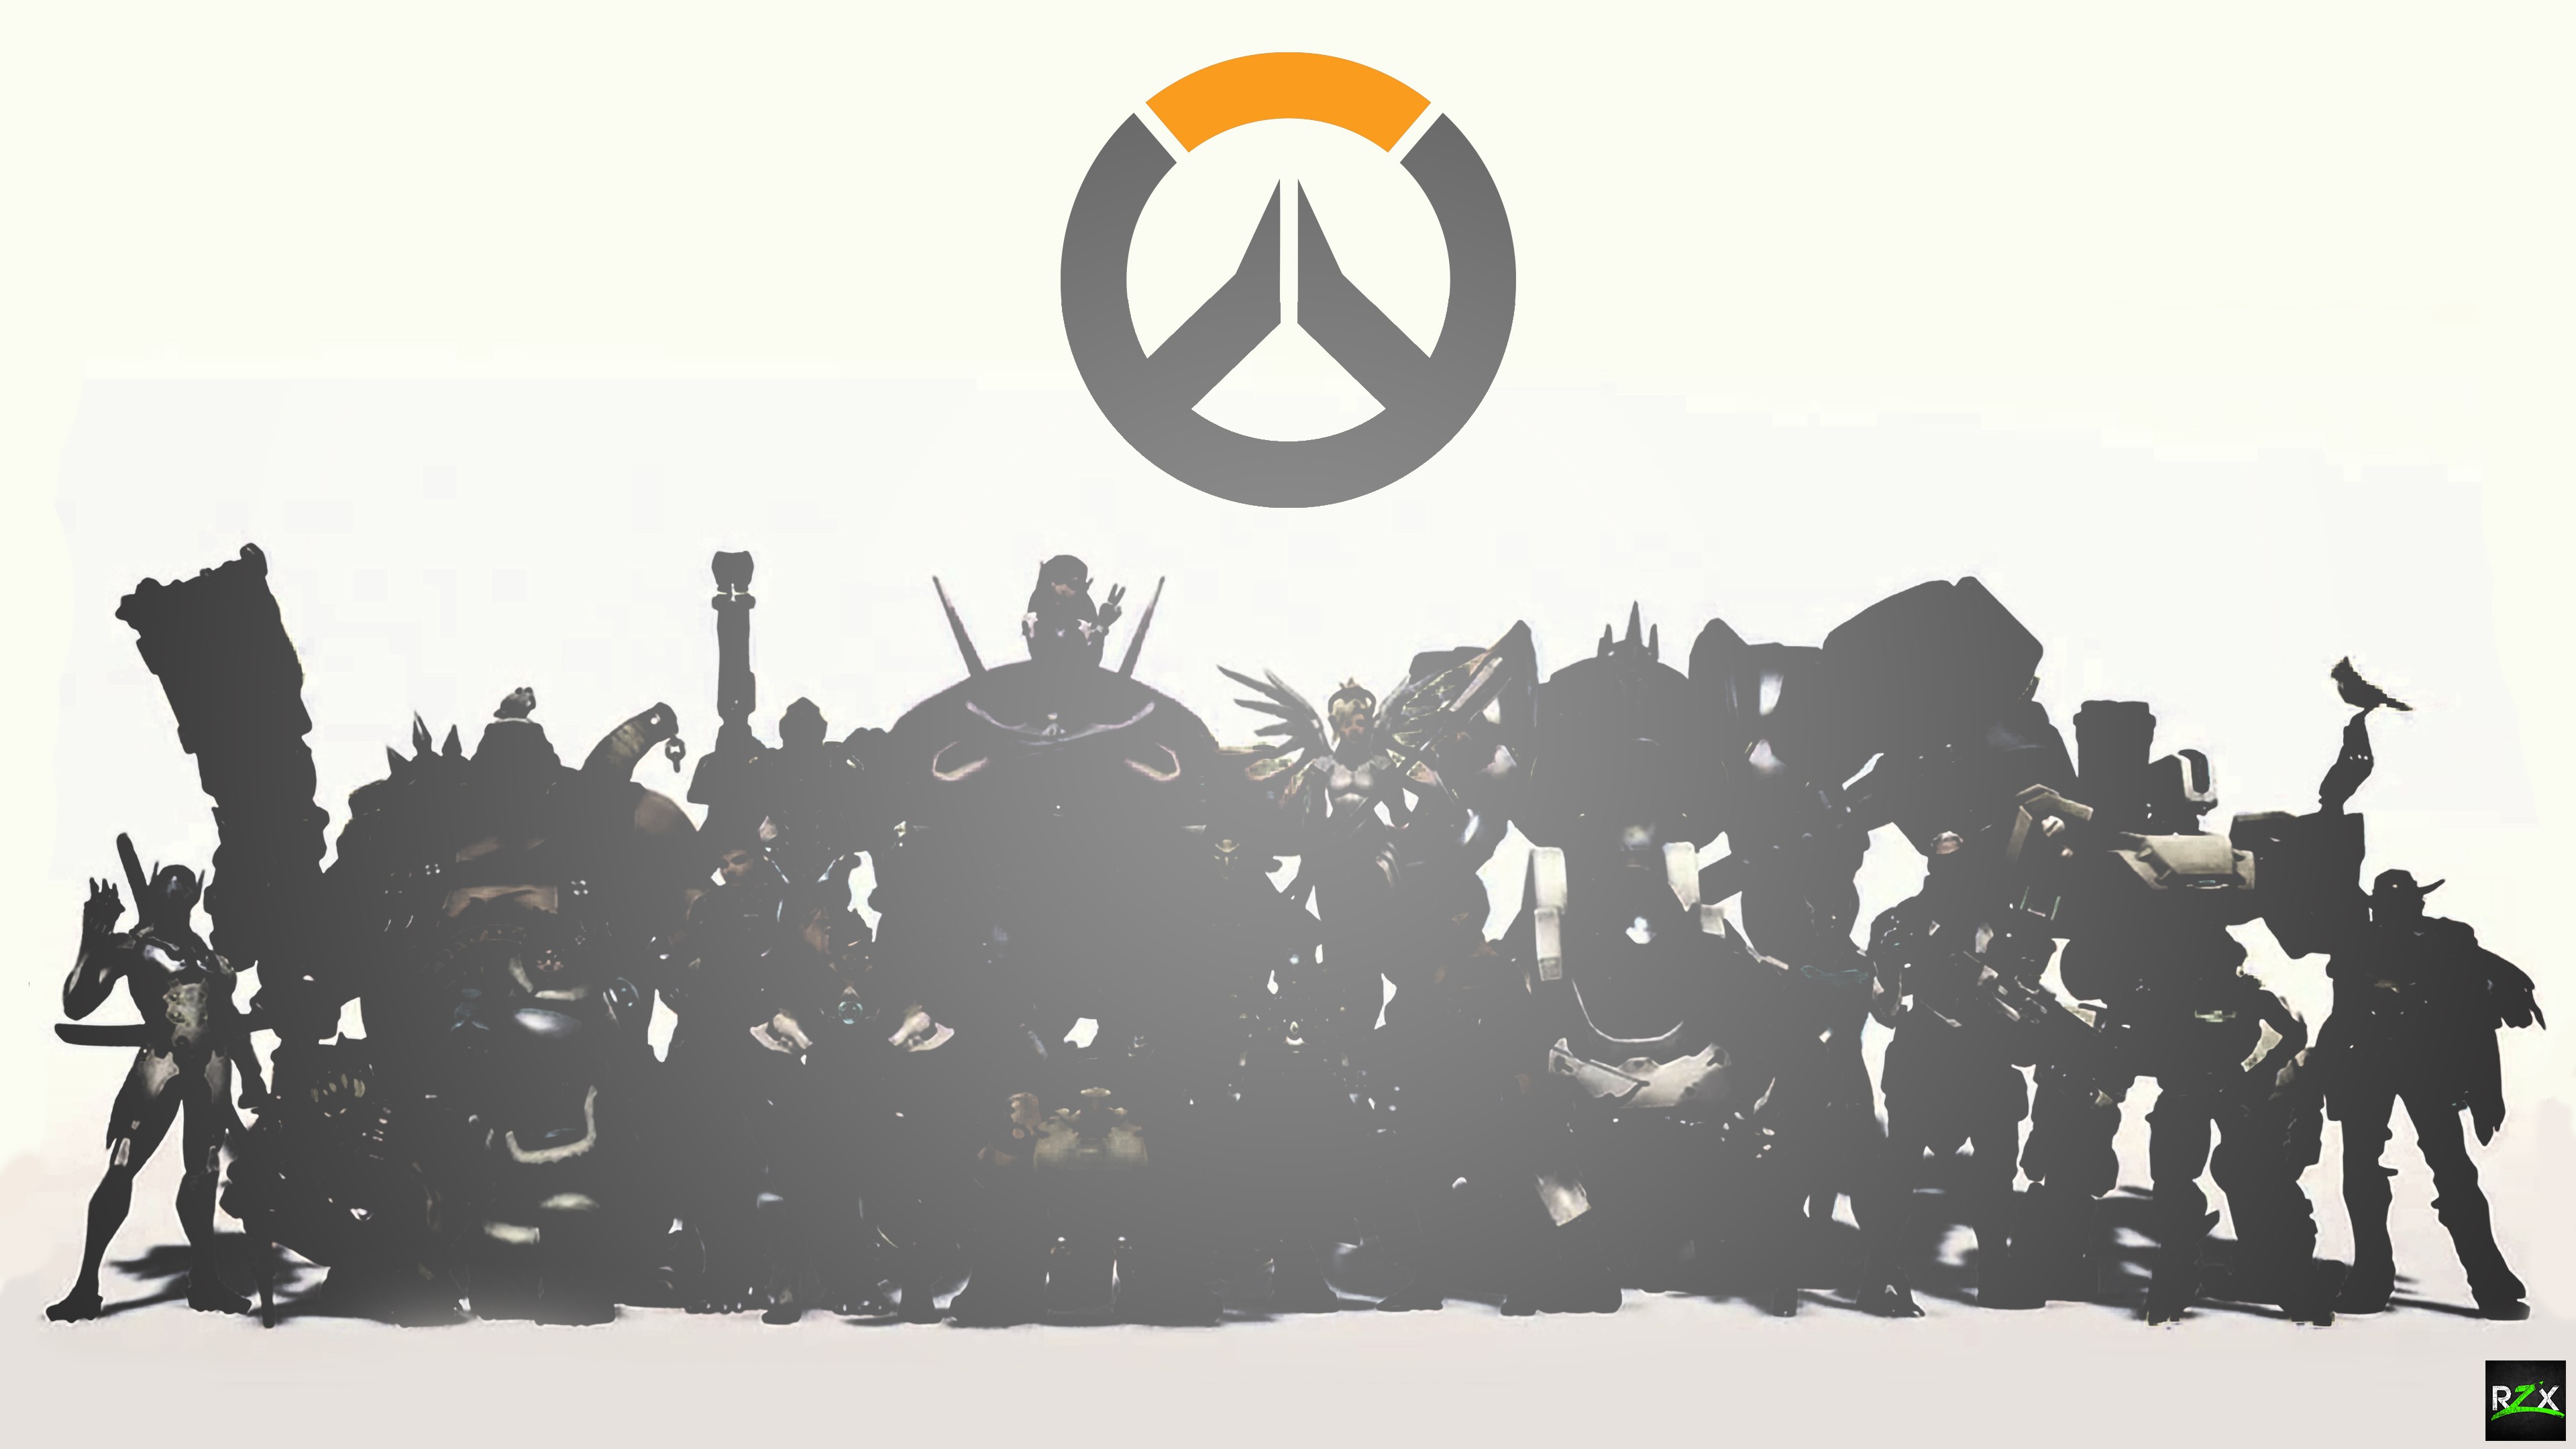 General 3840x2160 Overwatch Tracer (Overwatch) video games Widowmaker (Overwatch) Mercy (Overwatch) D.Va (Overwatch) Hanzo (Overwatch) Genji (Overwatch) Roadhog (Overwatch) McCree (Overwatch) PC gaming video game art video game characters white background logo